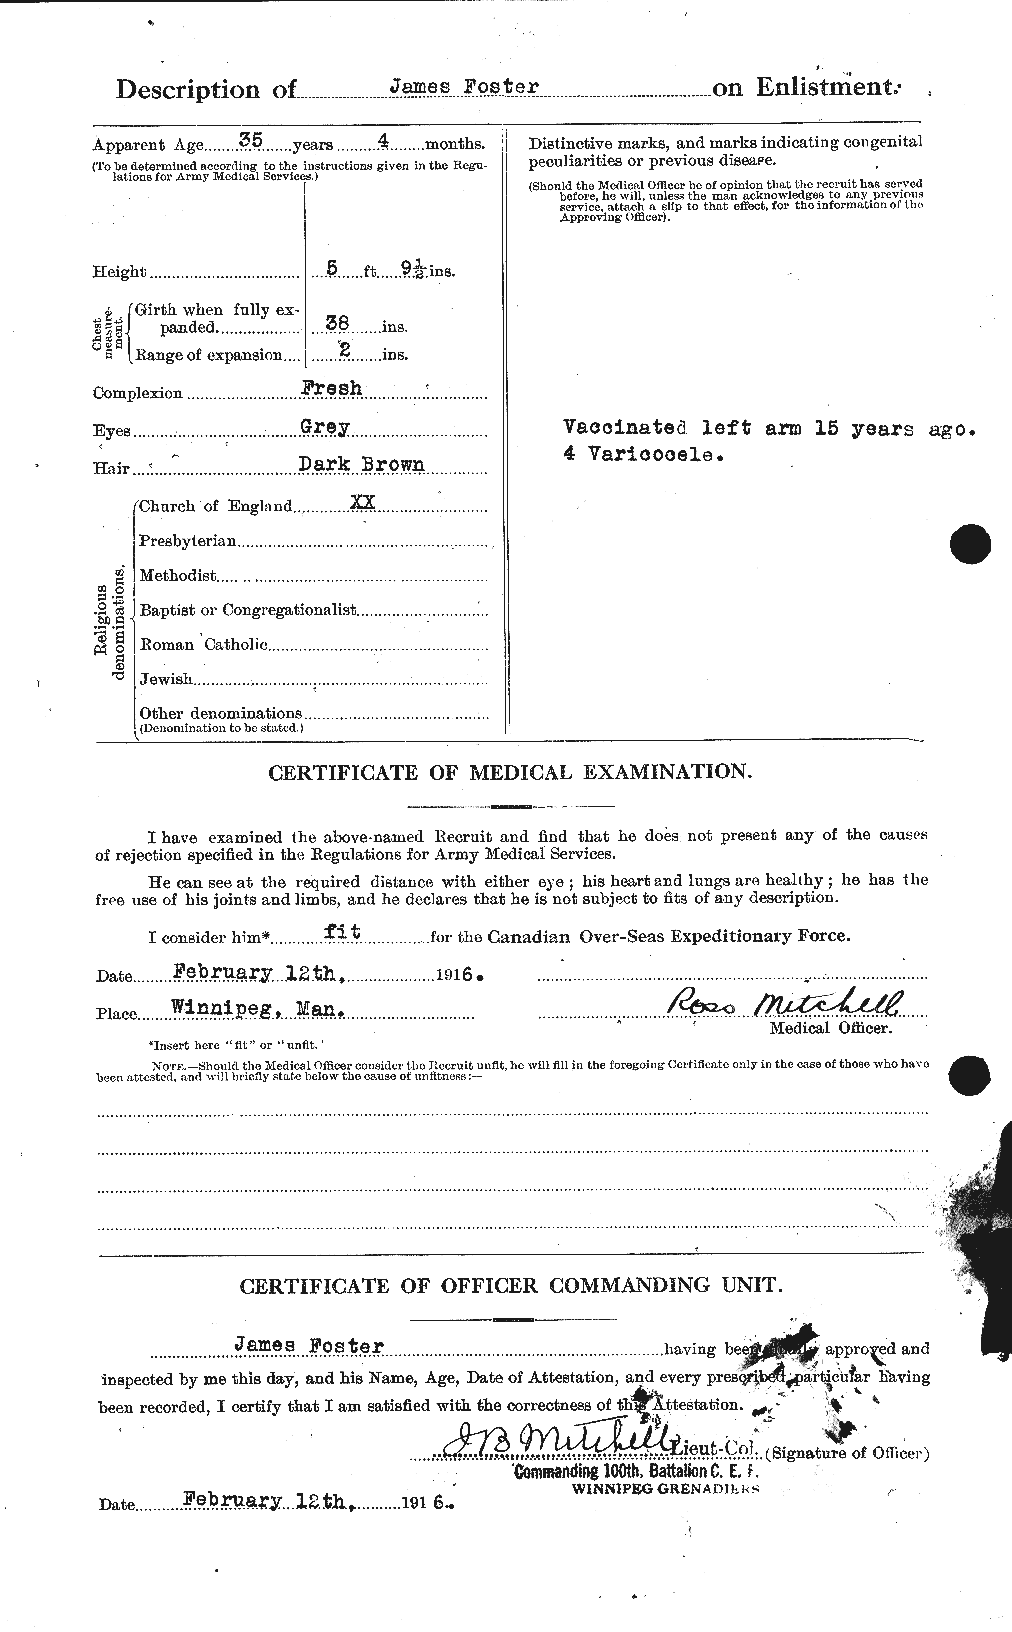 Personnel Records of the First World War - CEF 333280b